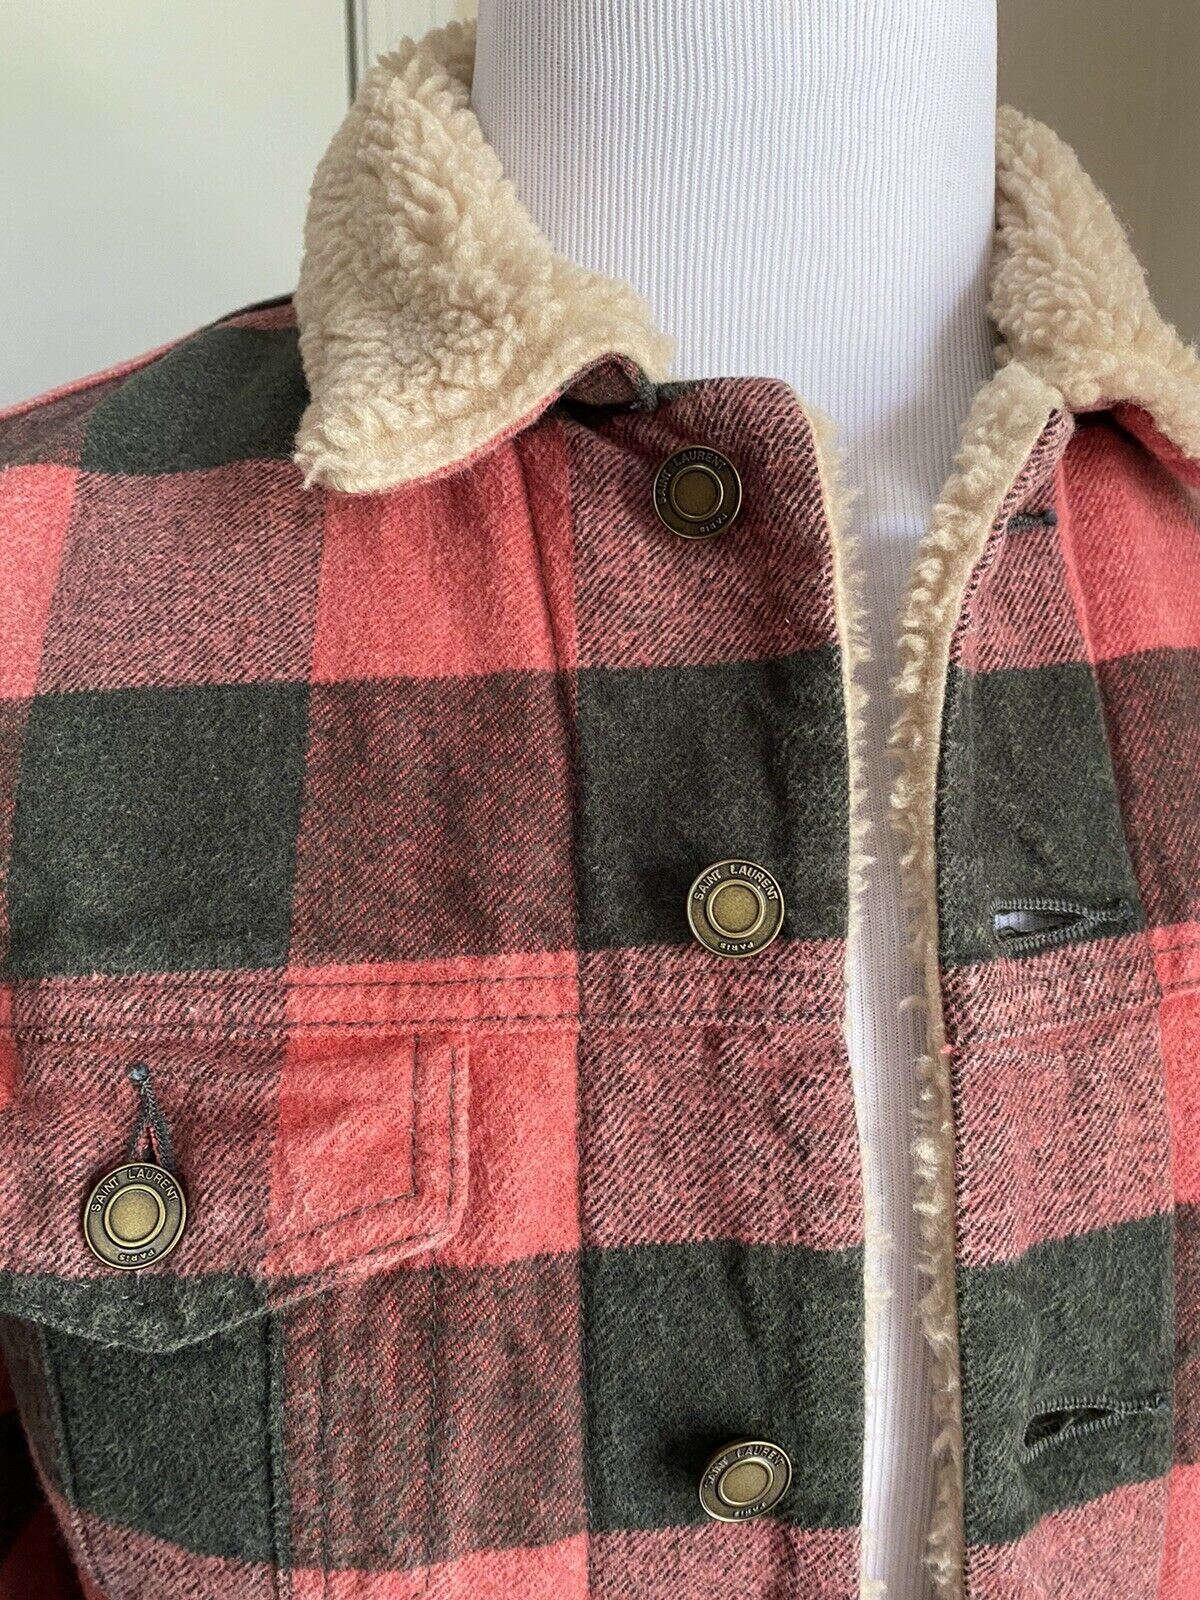 New $3190 Saint Laurent Men Fitted Checked Denim Jacket Shearing Red/Black XS